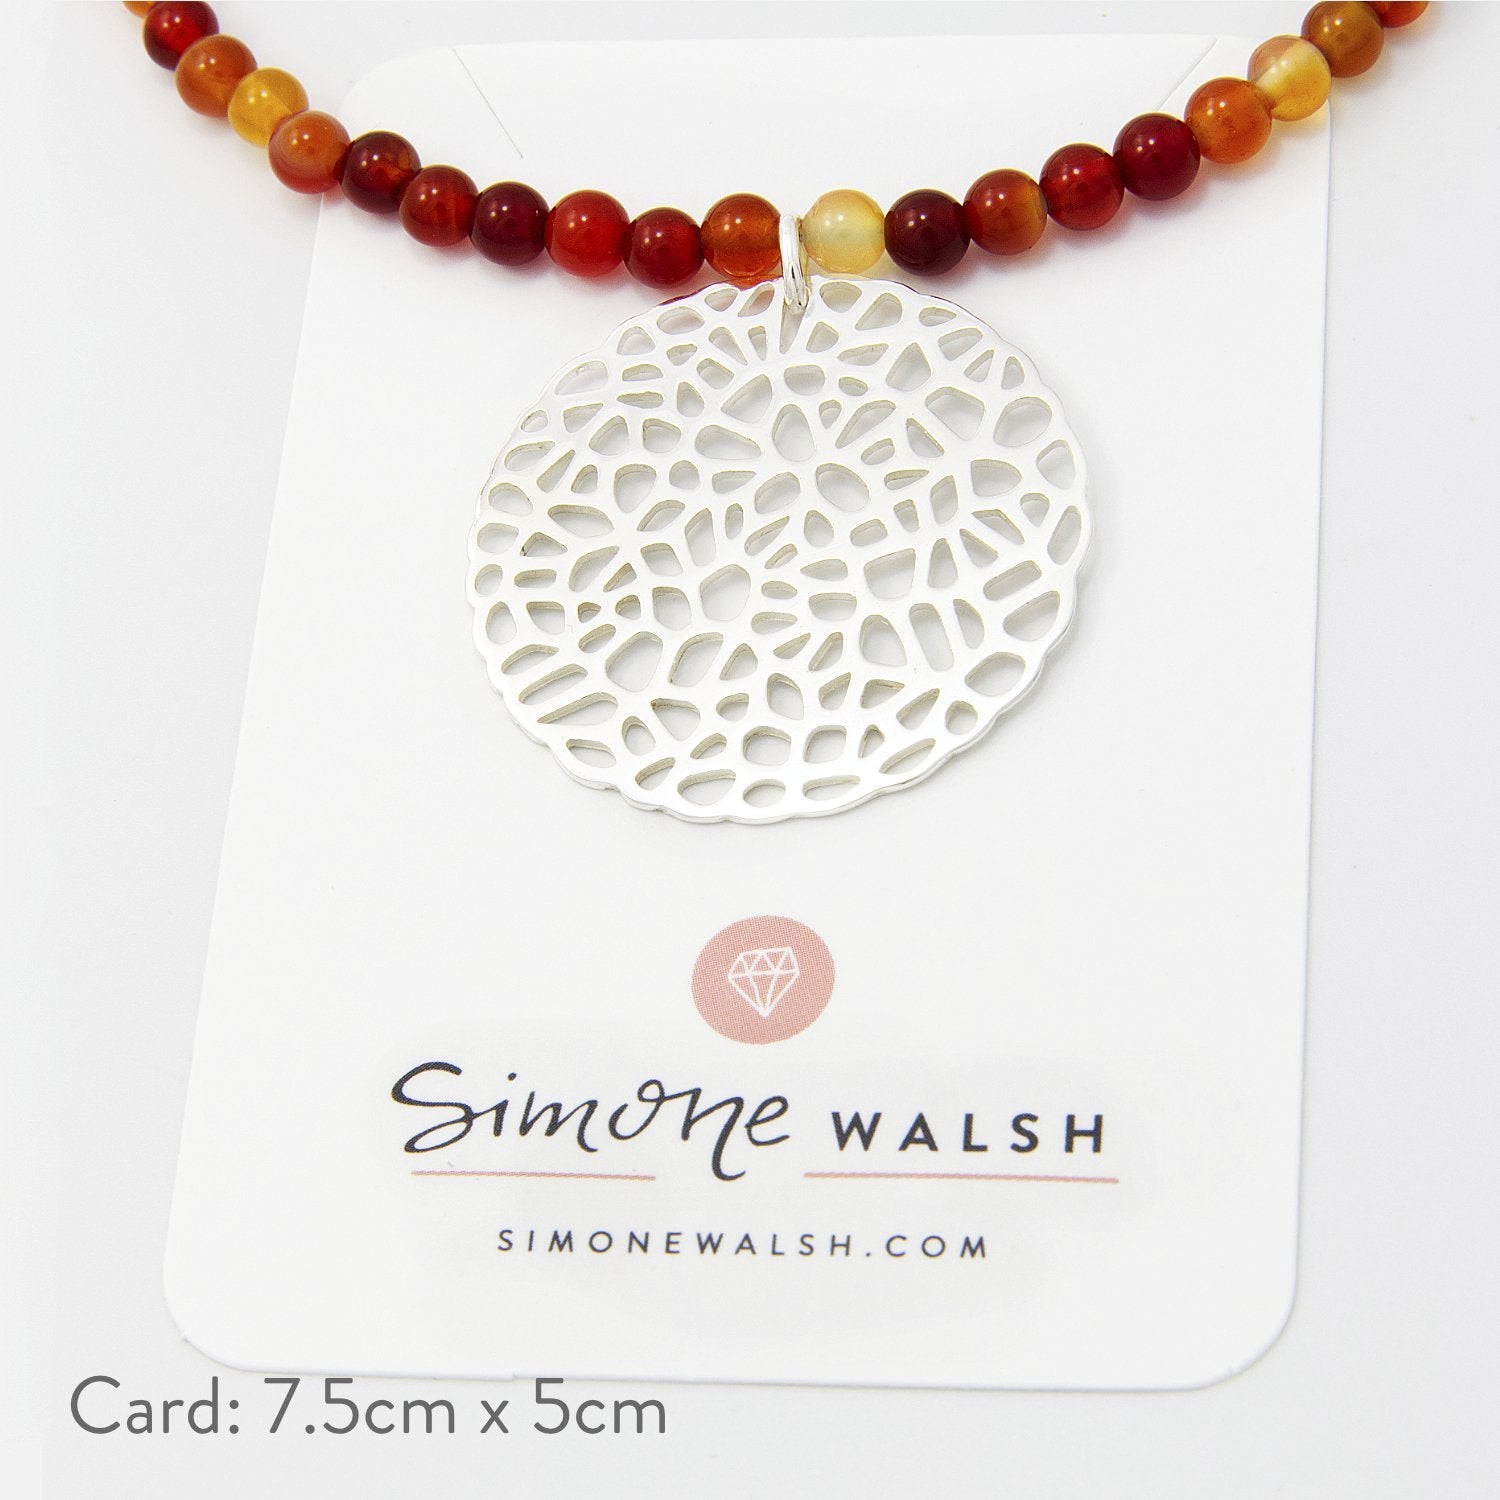 Coral pendant on red agate beaded necklace - Simone Walsh Jewellery Australia